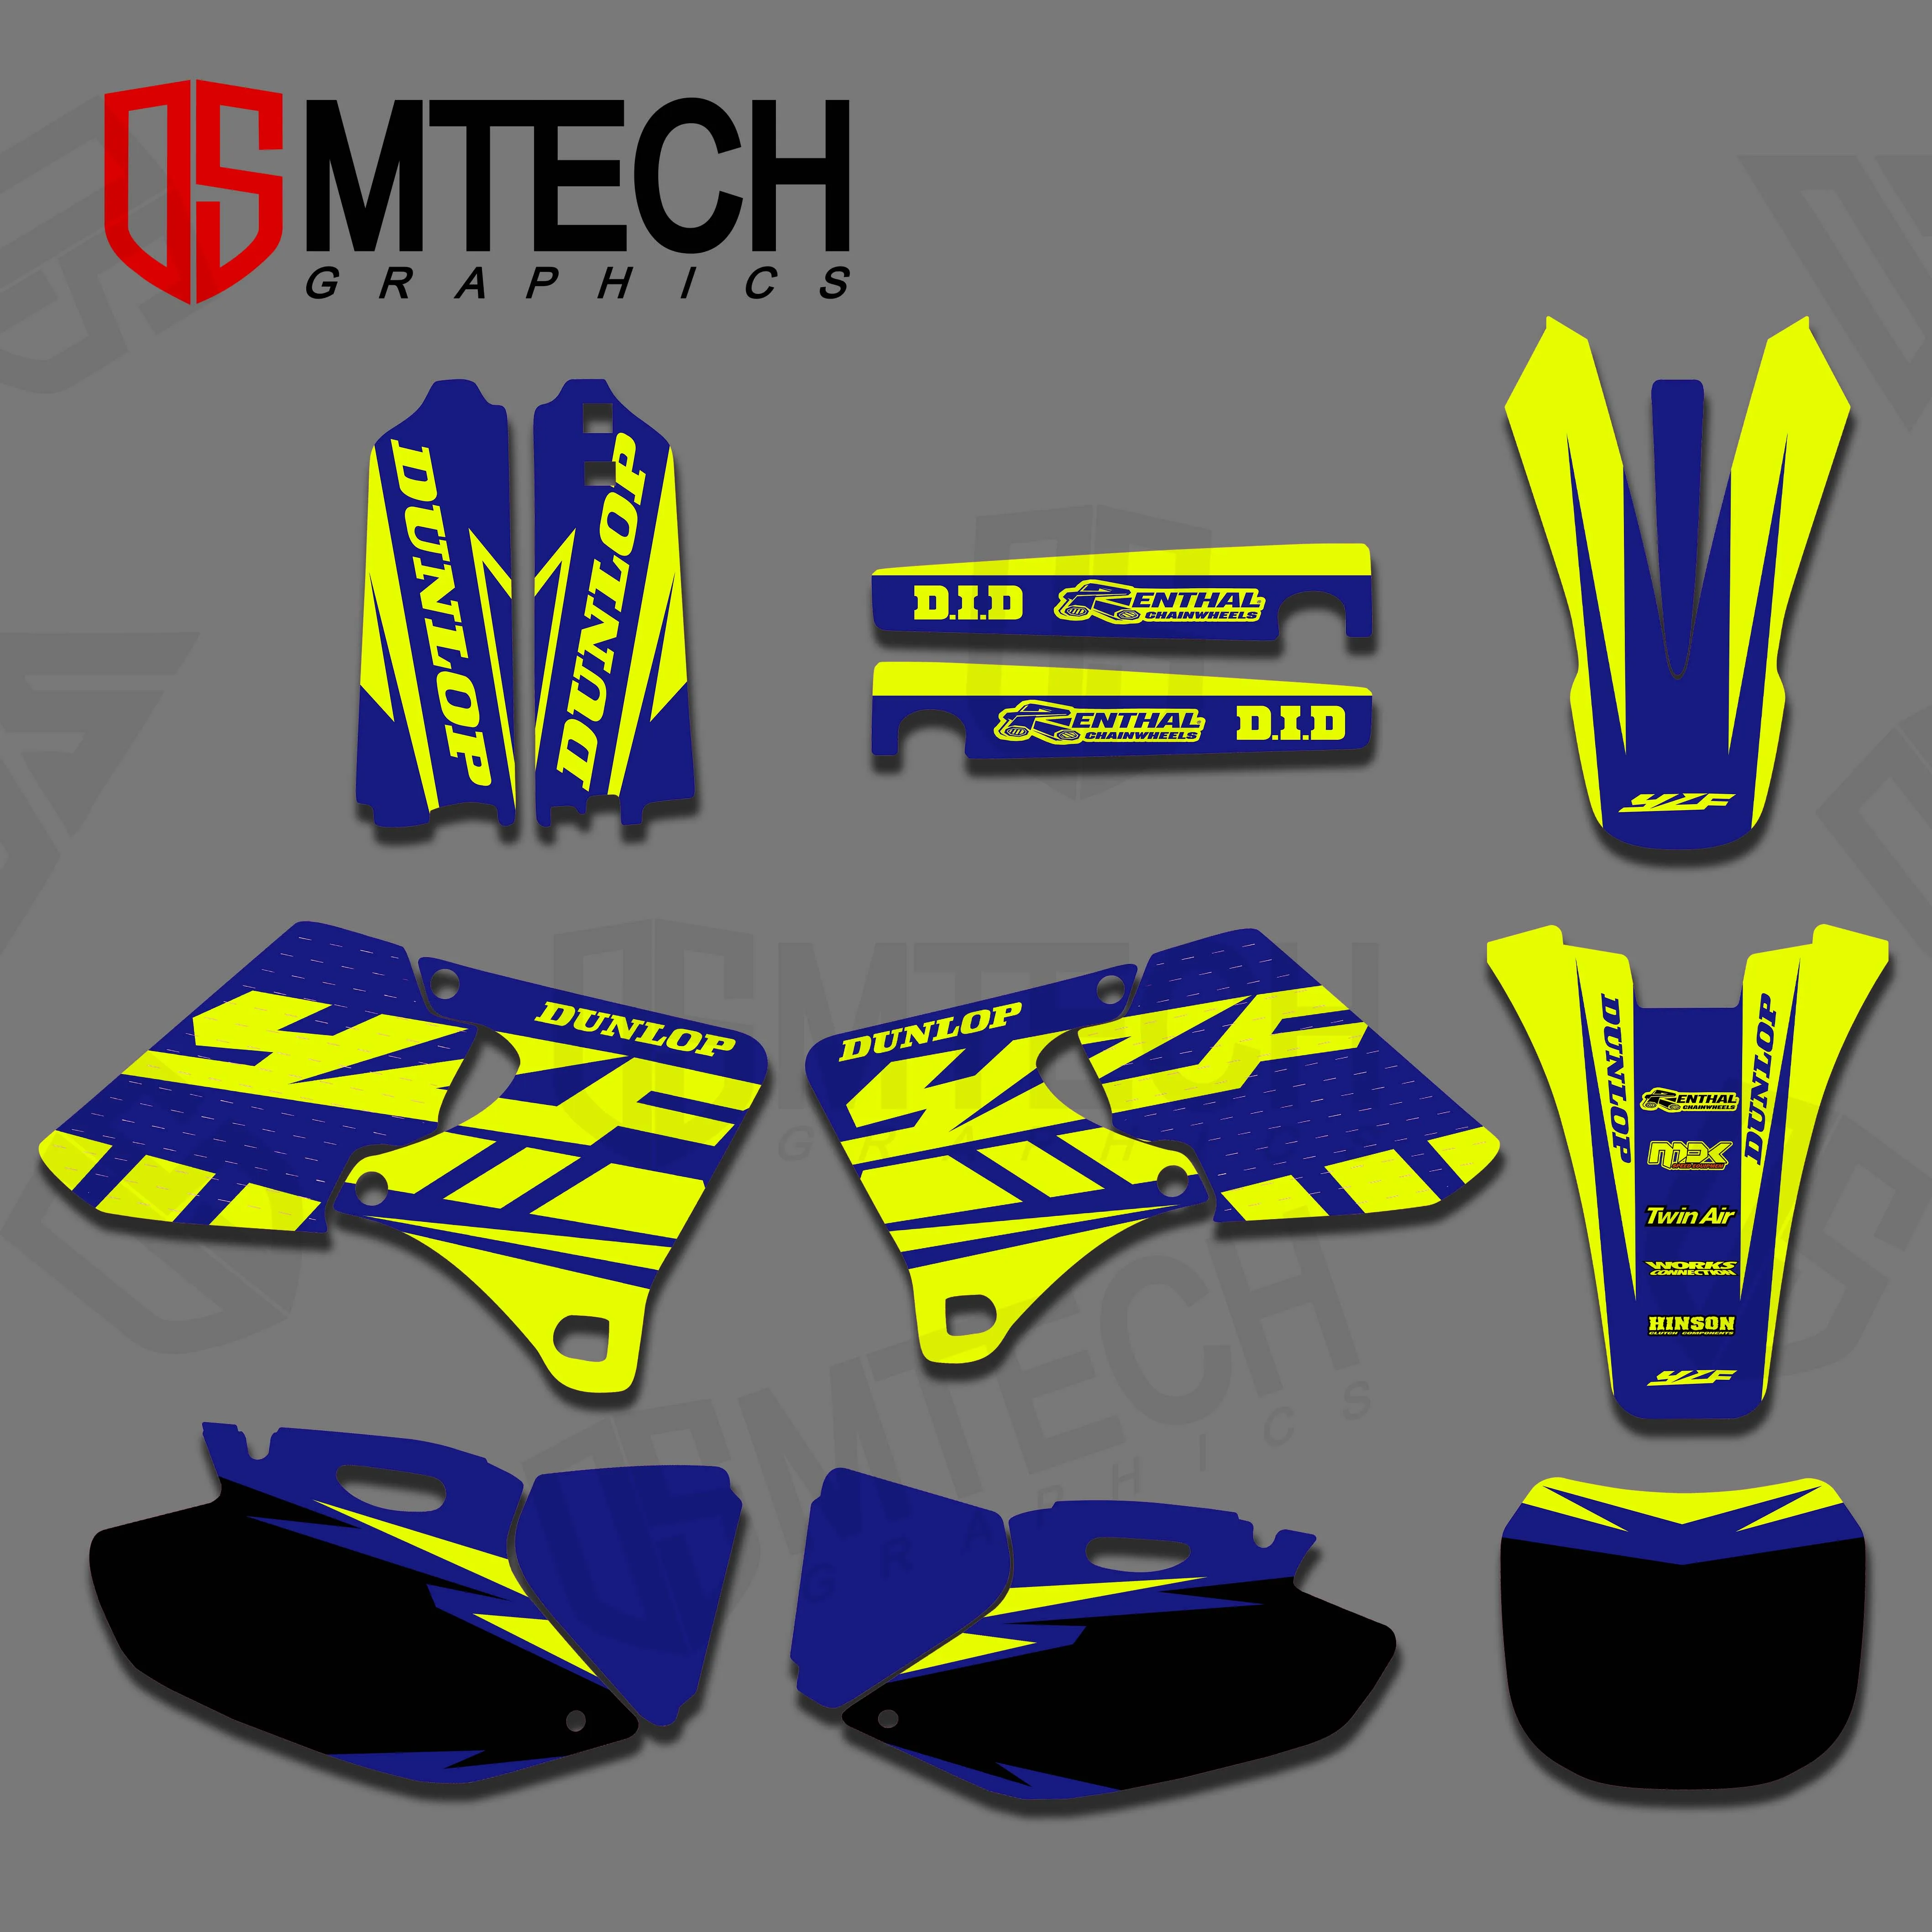 DSMTECH GRAPHICS & BACKGROUNDS DECALS STICKERS Kits for Yamaha YZ250F YZ400F YZ426F YZF 250F 400F 426F 1998 1999 2000 2001 2002